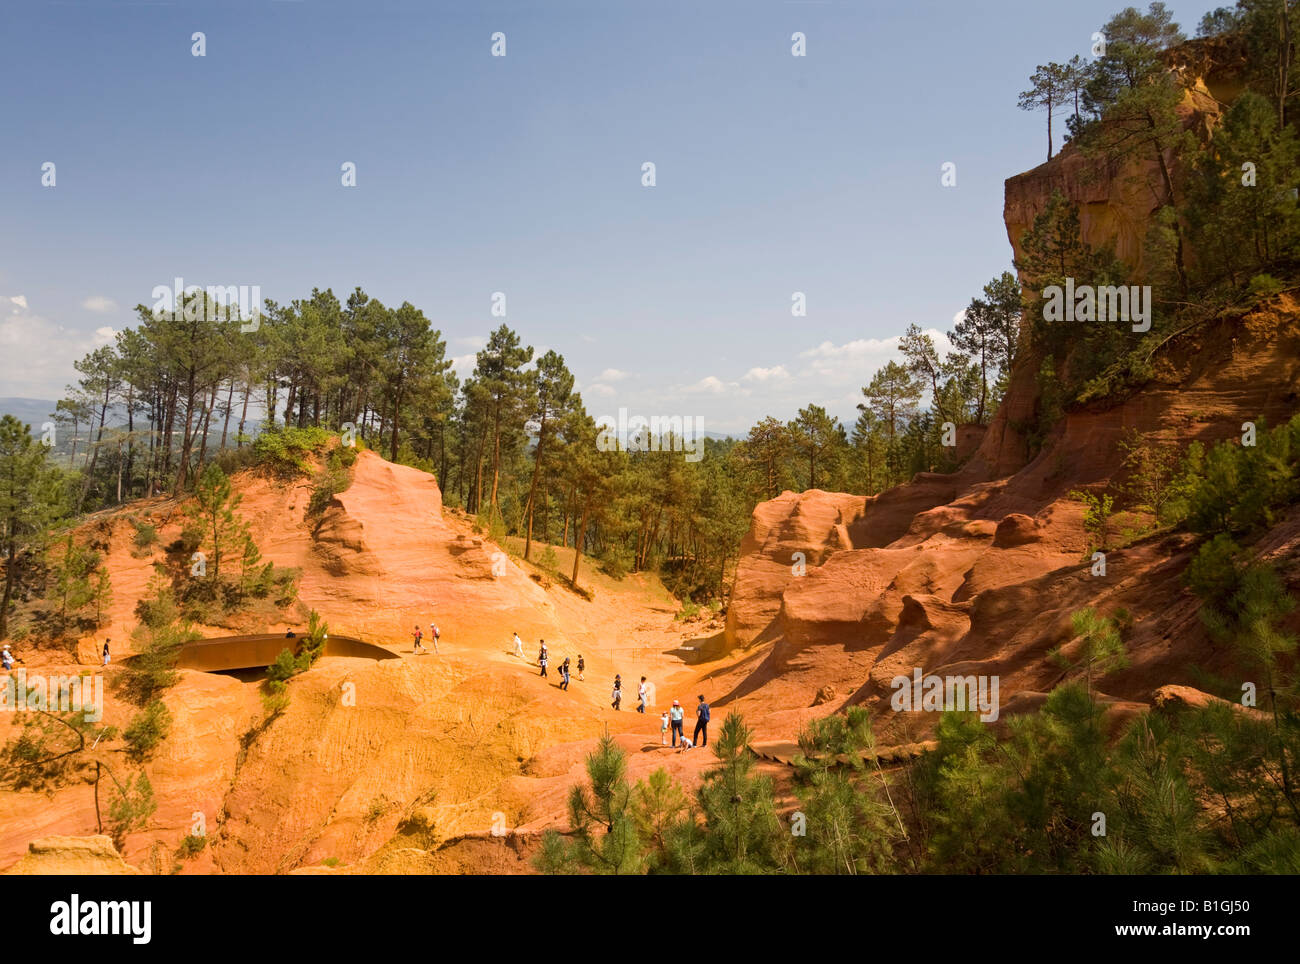 A view of the 'Ochre path' in the Roussillon commune (France). Vue du 'Sentier des Ocres' (Roussillon 84220 - France). Stock Photo